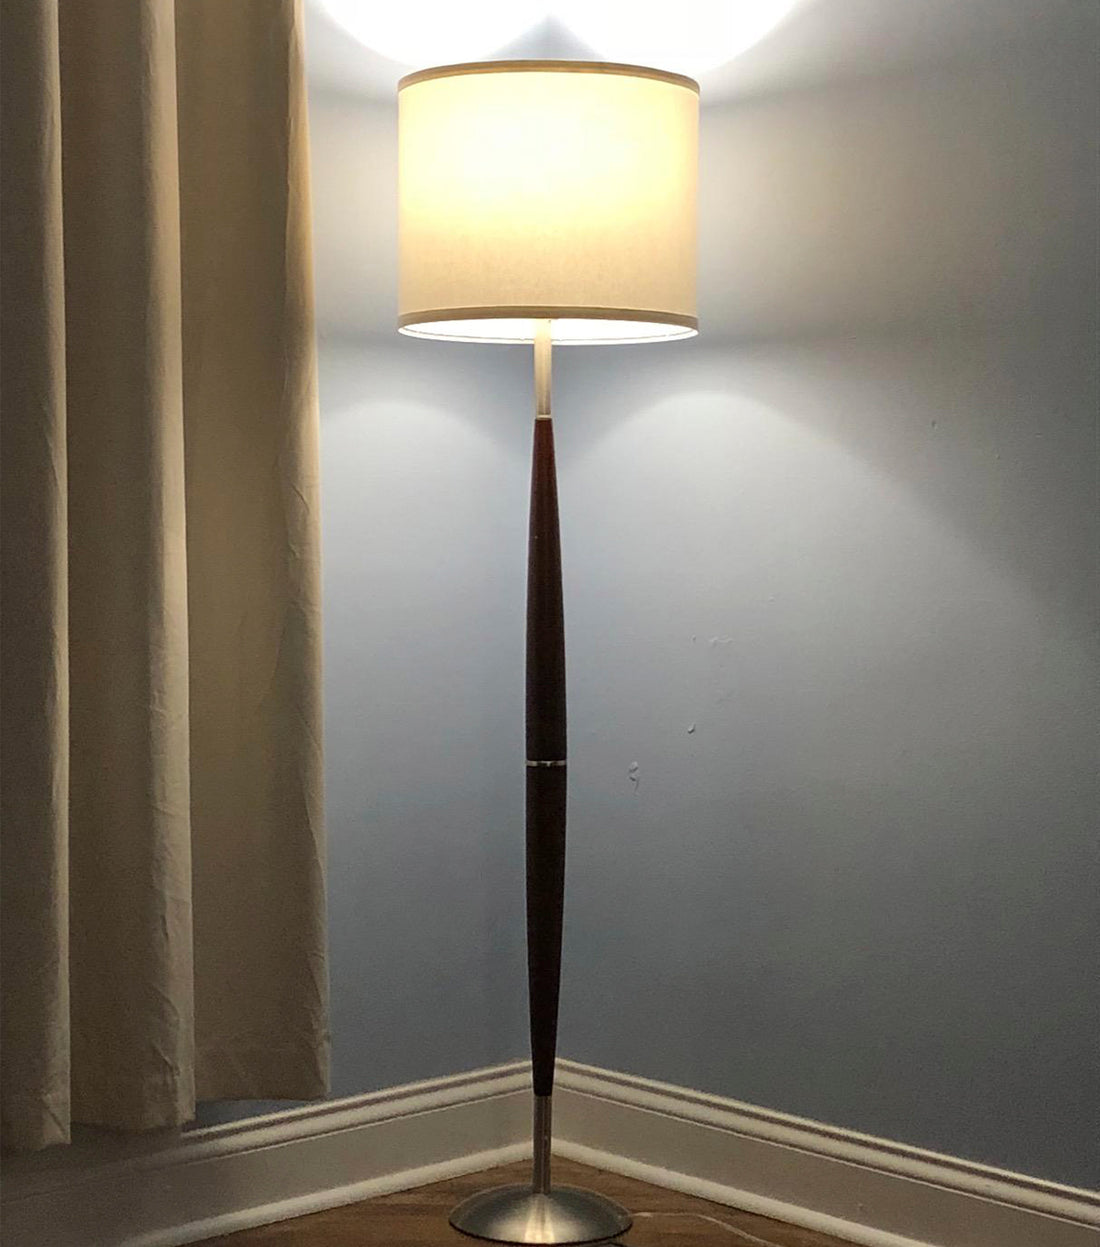 Brightech Lucas - Mid Century Modern Floor Lamp for Bedroom Reading - Brighten Living Room Corners with A Free Standing Light - Tall Office Lighting with Drum Shade & Handsome Wood Finish